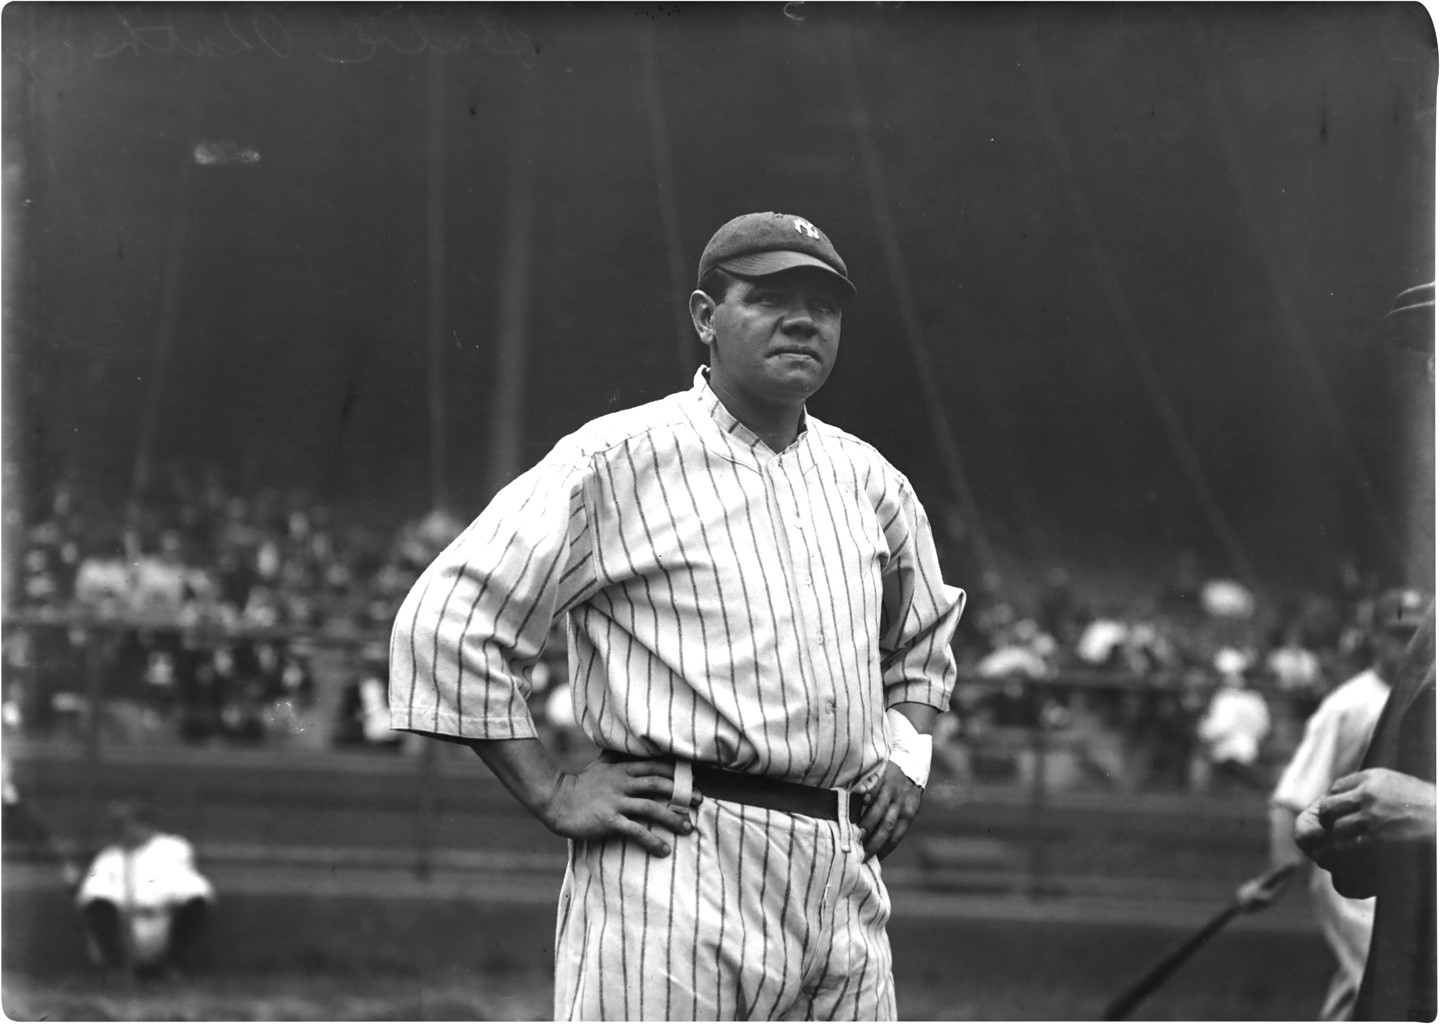 The Brown Brothers Collection - Superb Babe Ruth New York Yankees Glass Plate Negative